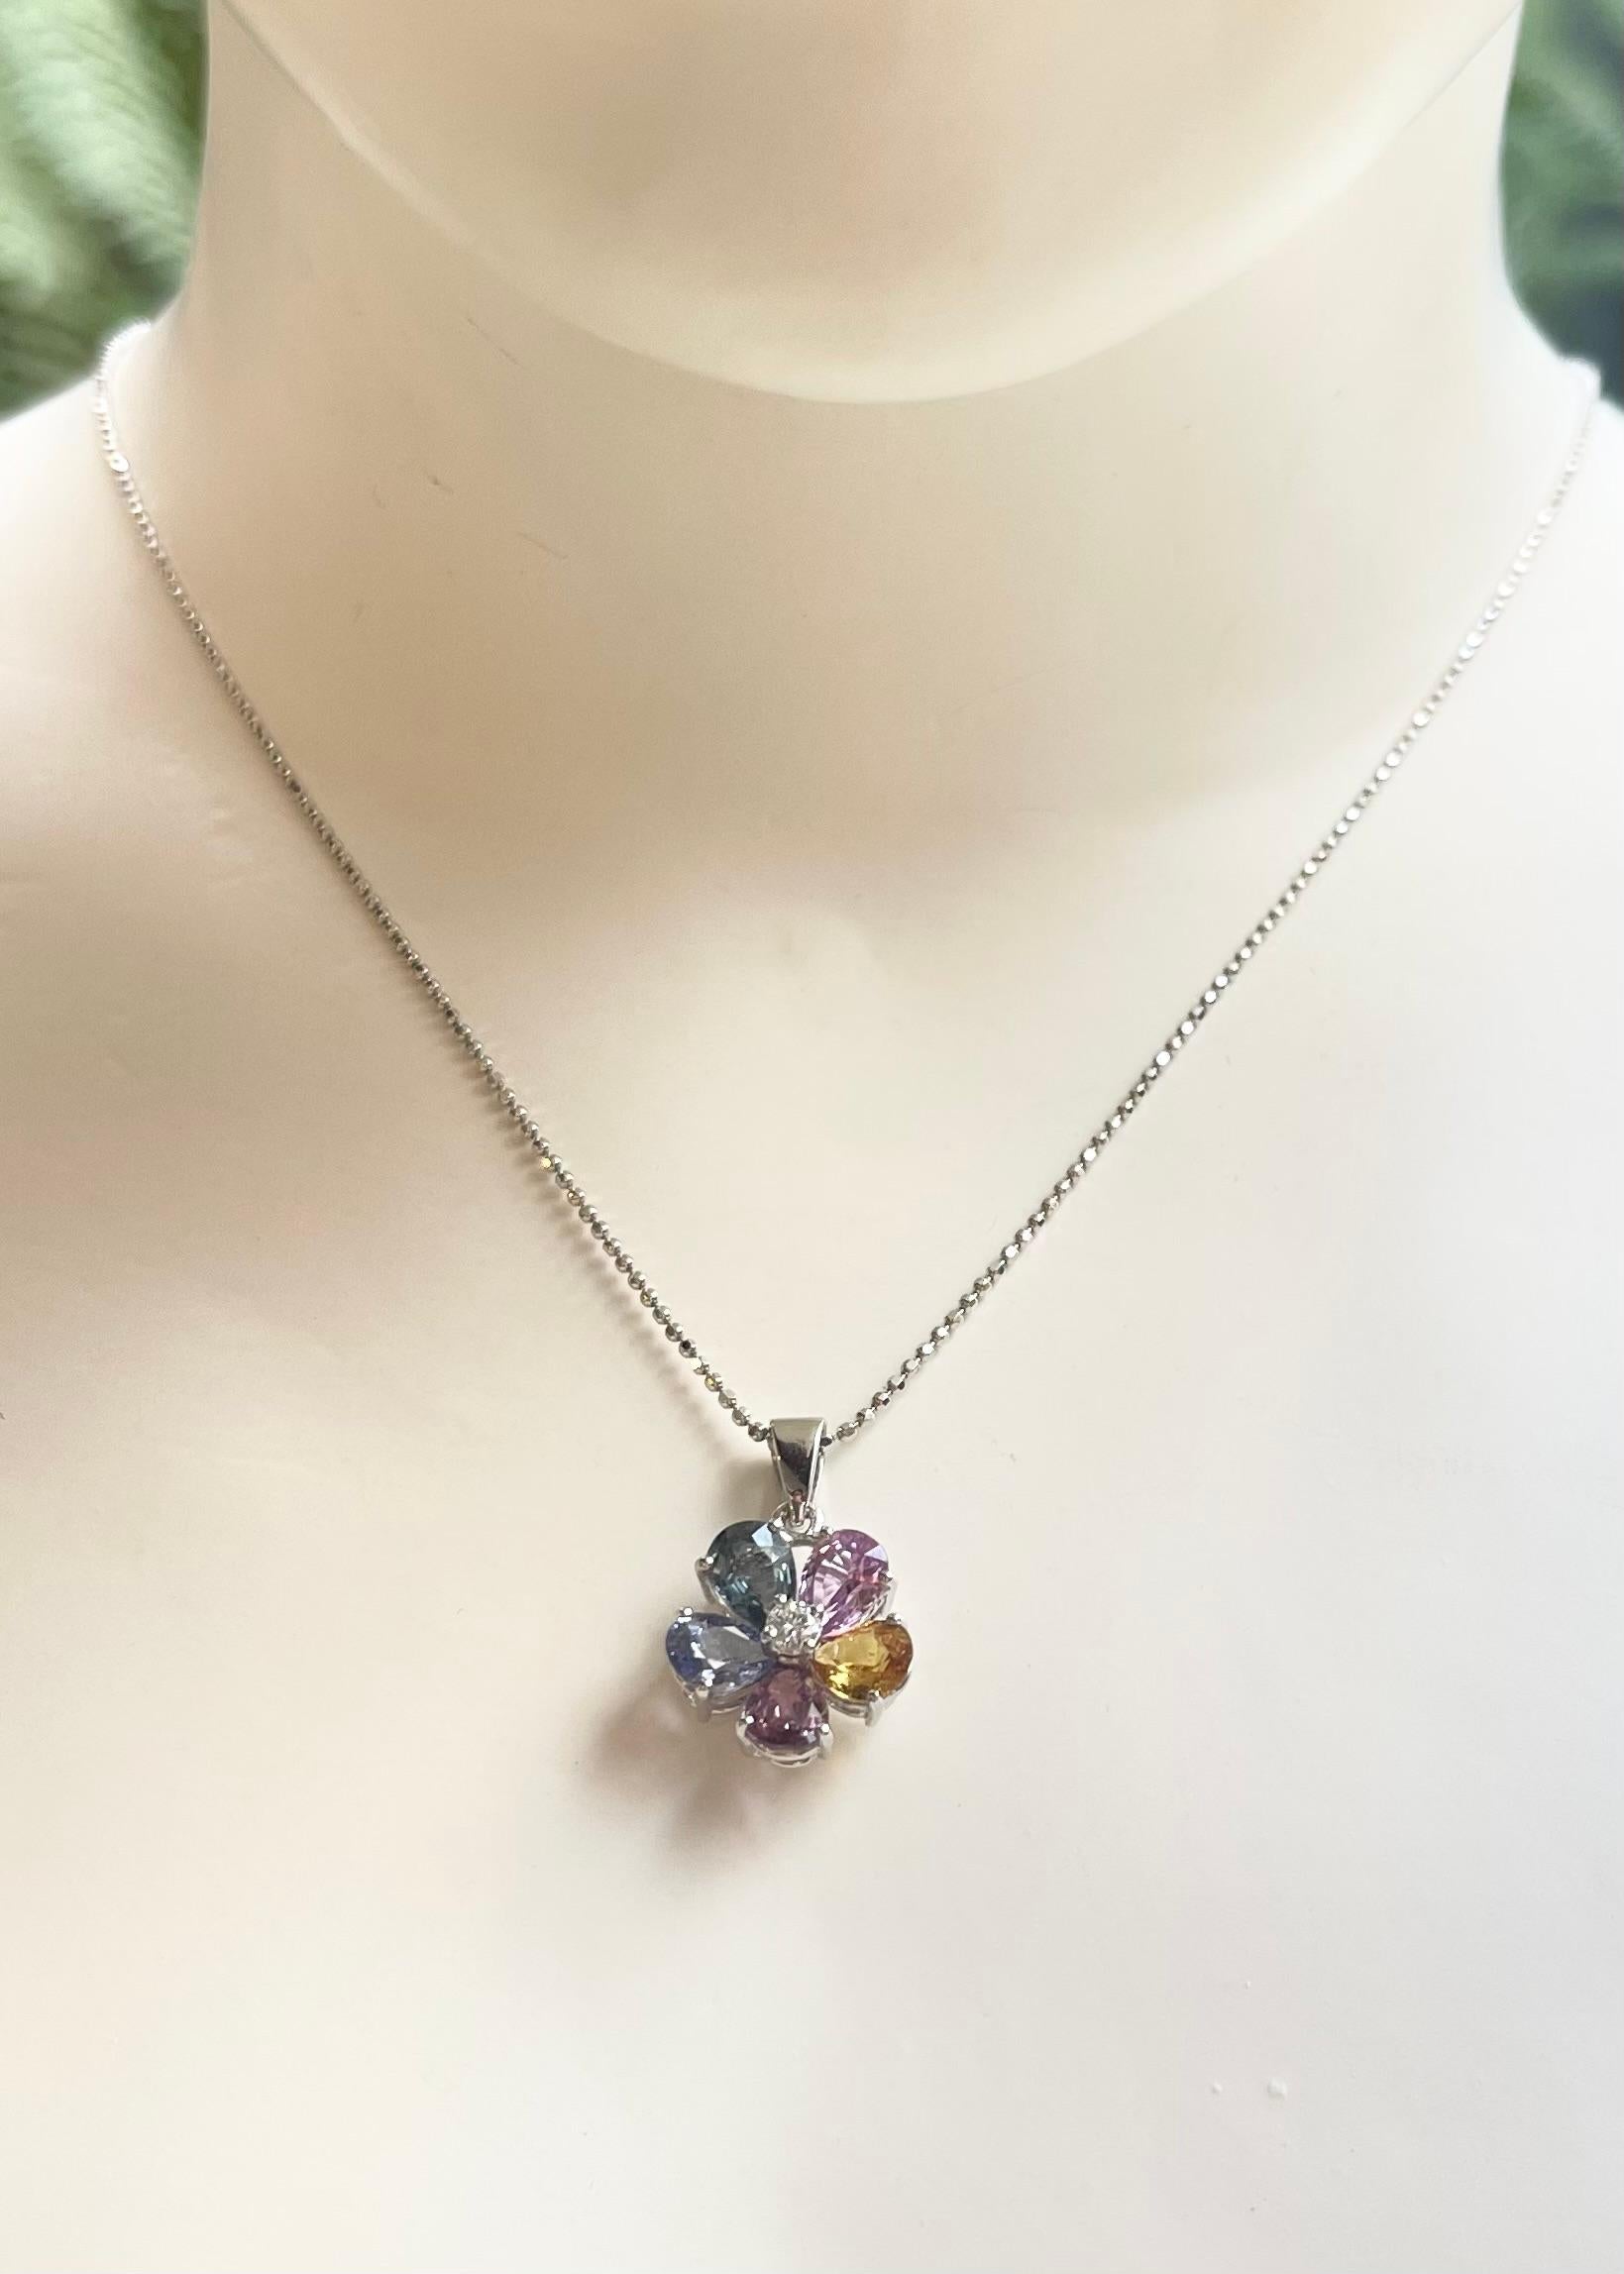 Rainbow Color Sapphire 3.98 carats with Diamond 0.10 carat Pendant set in 18K White Gold Settings
(chain not included)

Width: 1.3 cm 
Length: 2.1 cm
Total Weight: 2.95 grams

